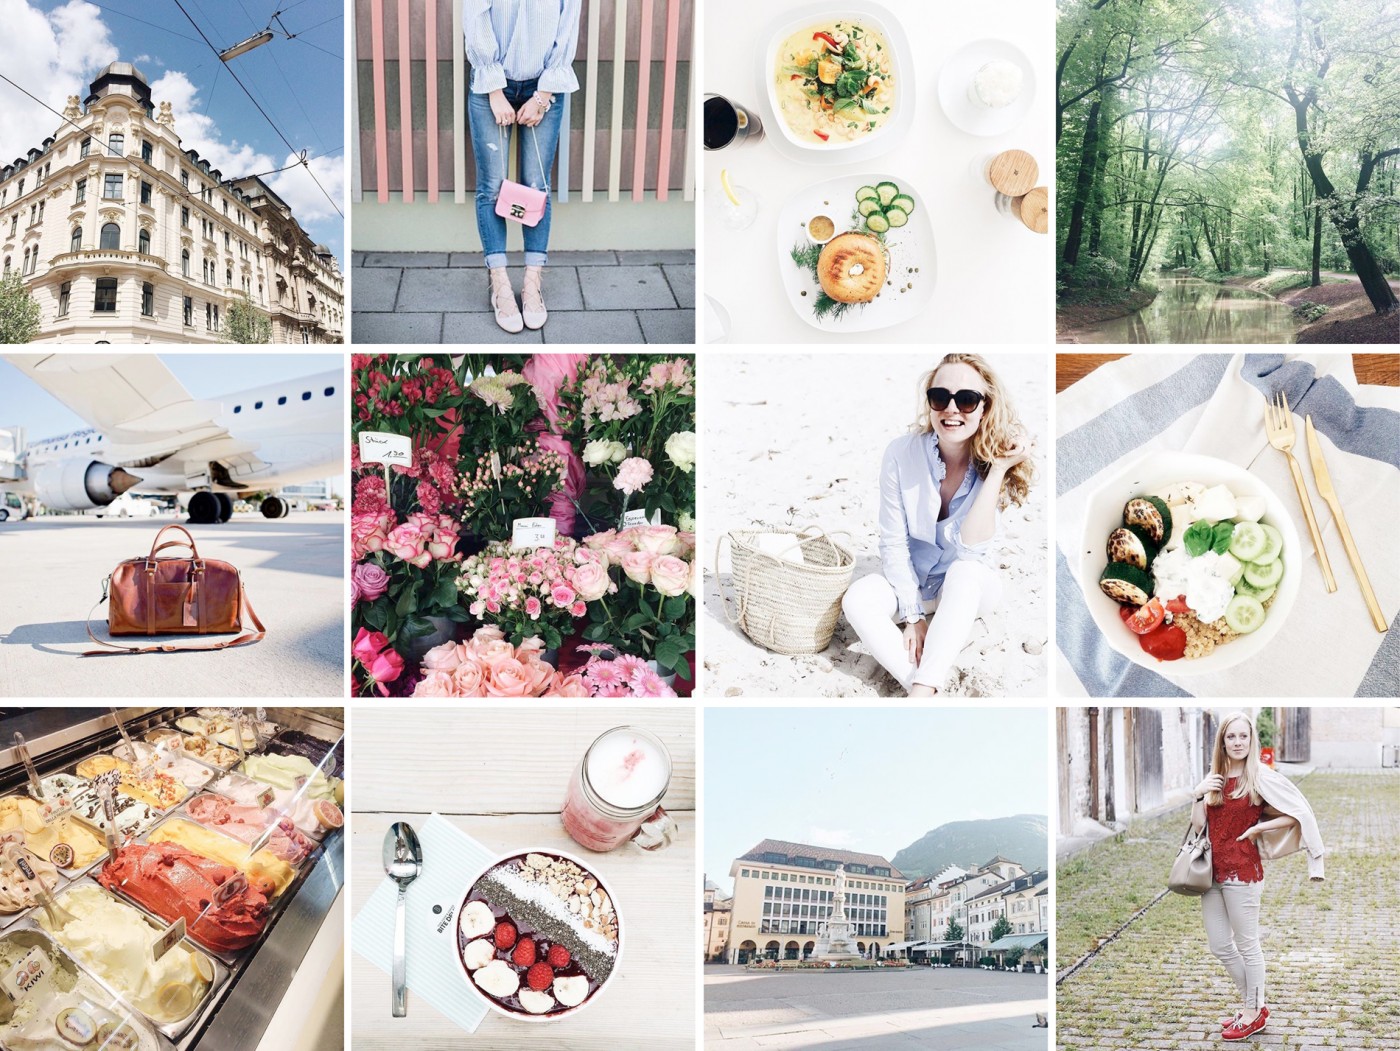 monthly favorites, Life on my phone | München Modeblog, German Fashion Blog, Fashionblogger, new trends